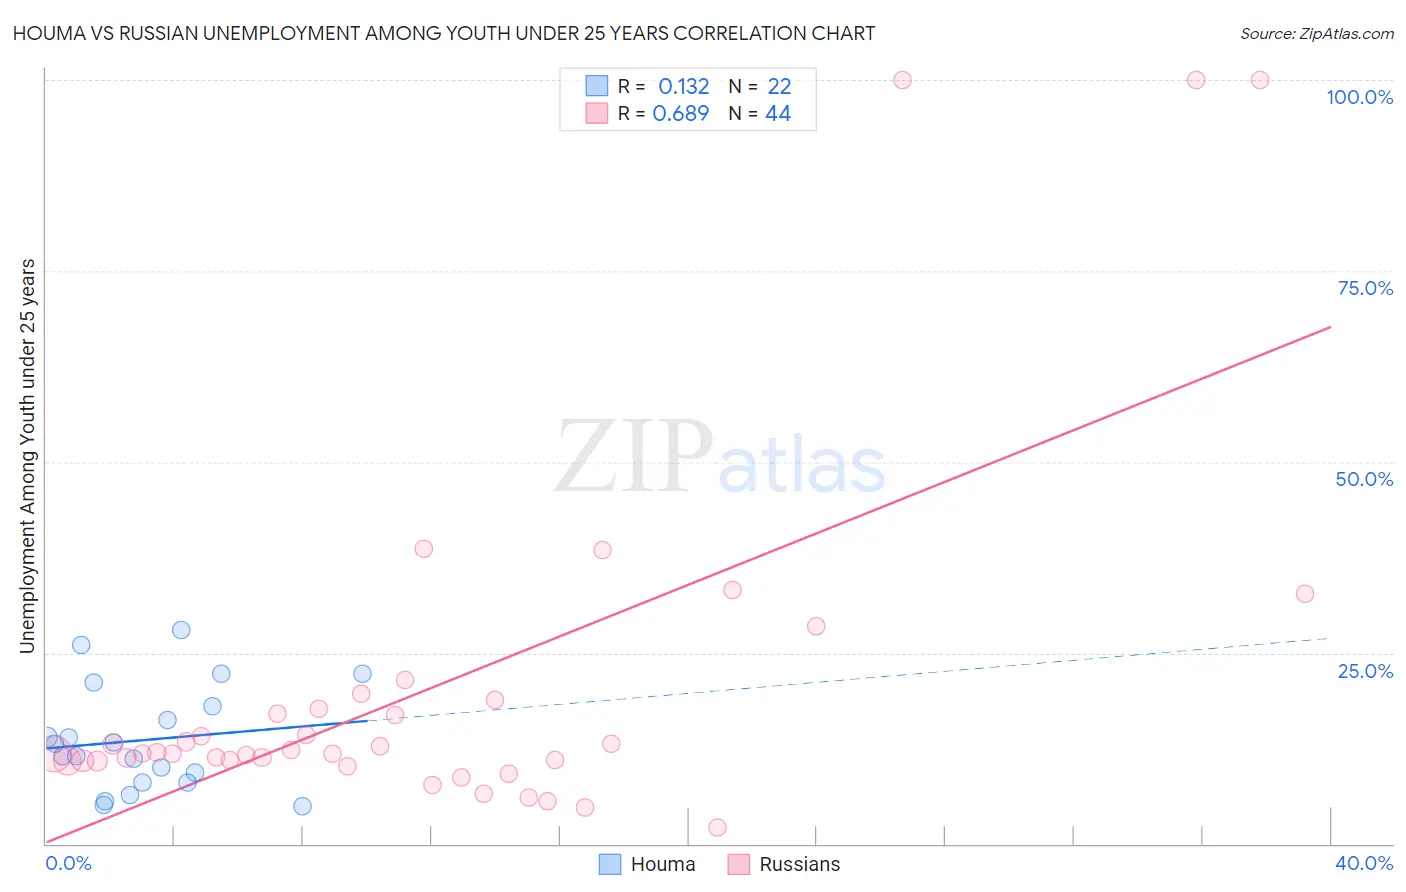 Houma vs Russian Unemployment Among Youth under 25 years